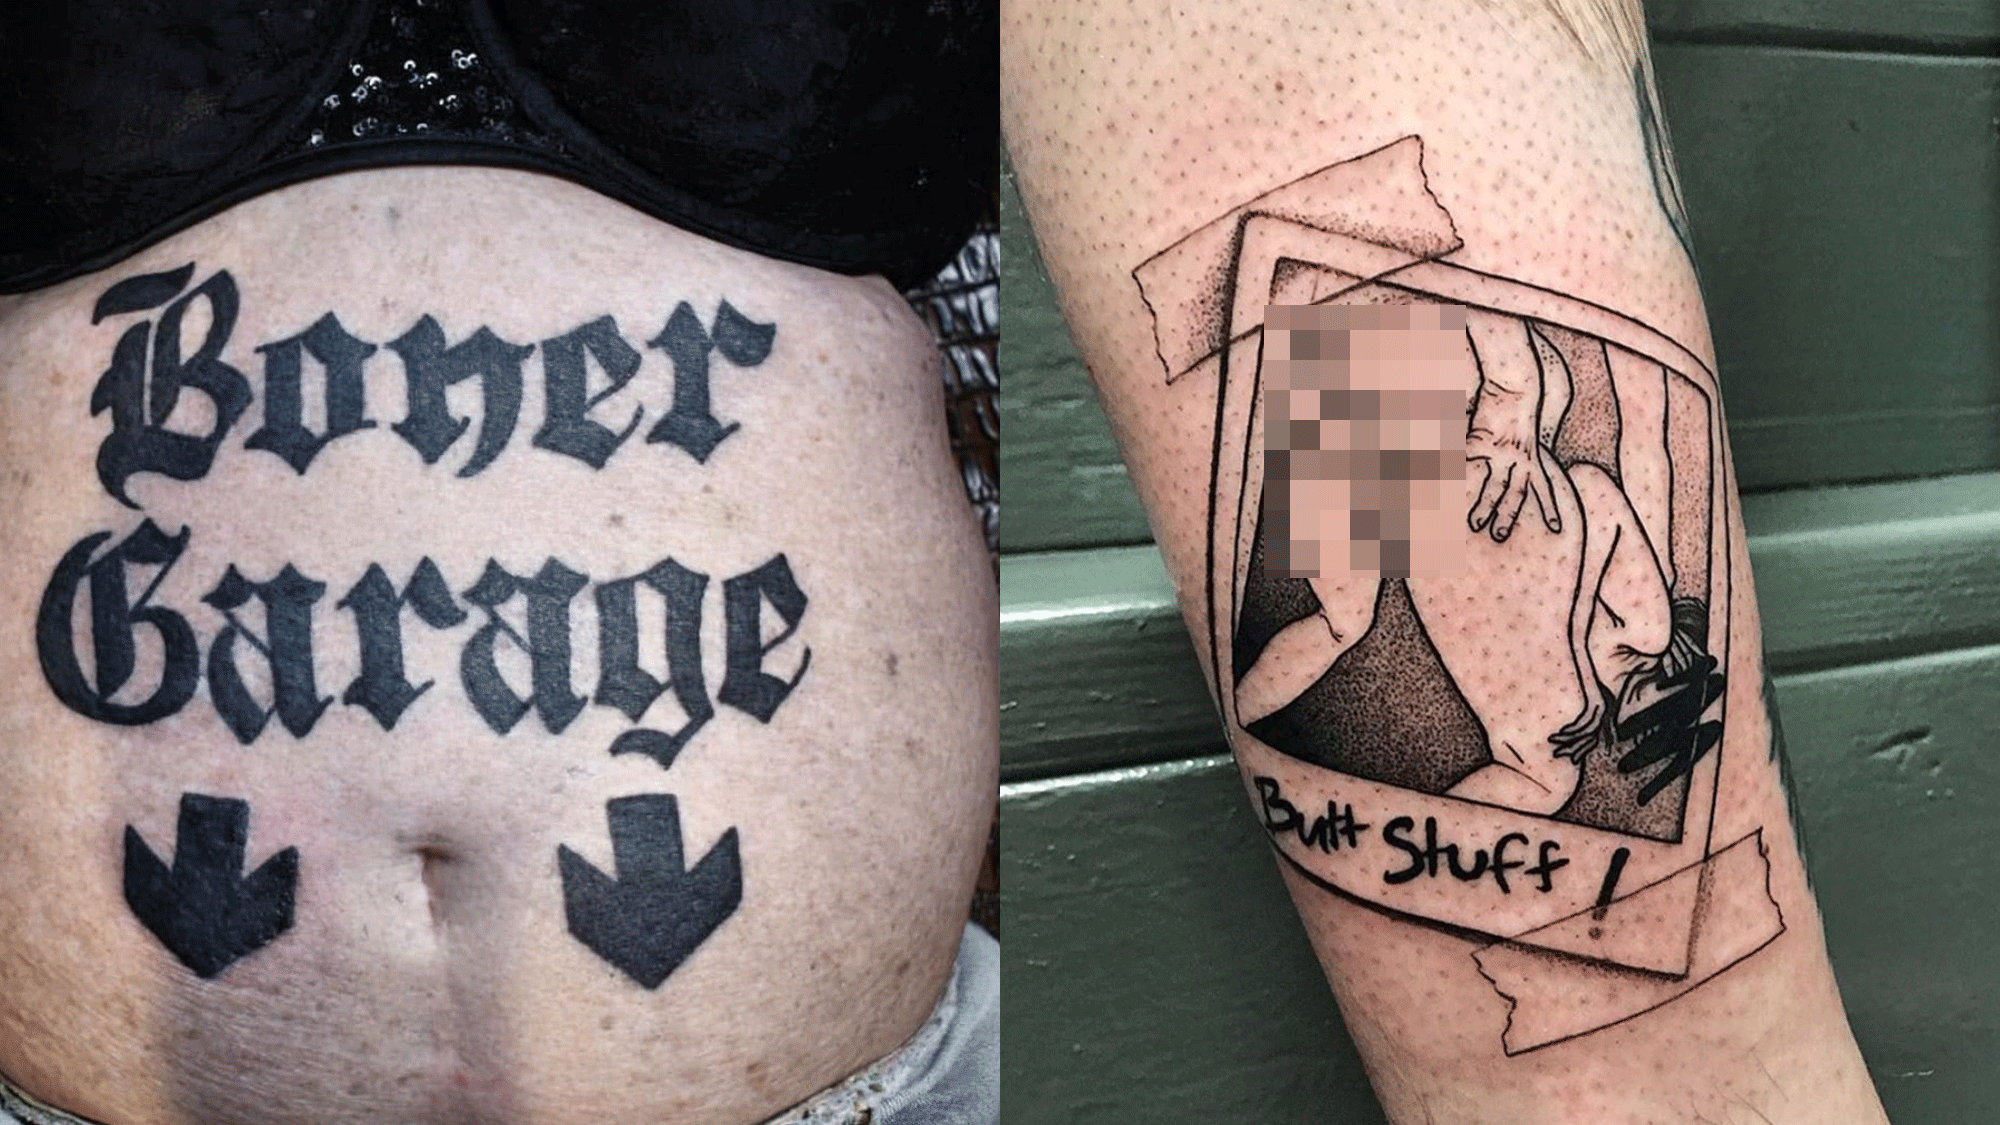 A Gallery of Hilariously Bad Tattoos